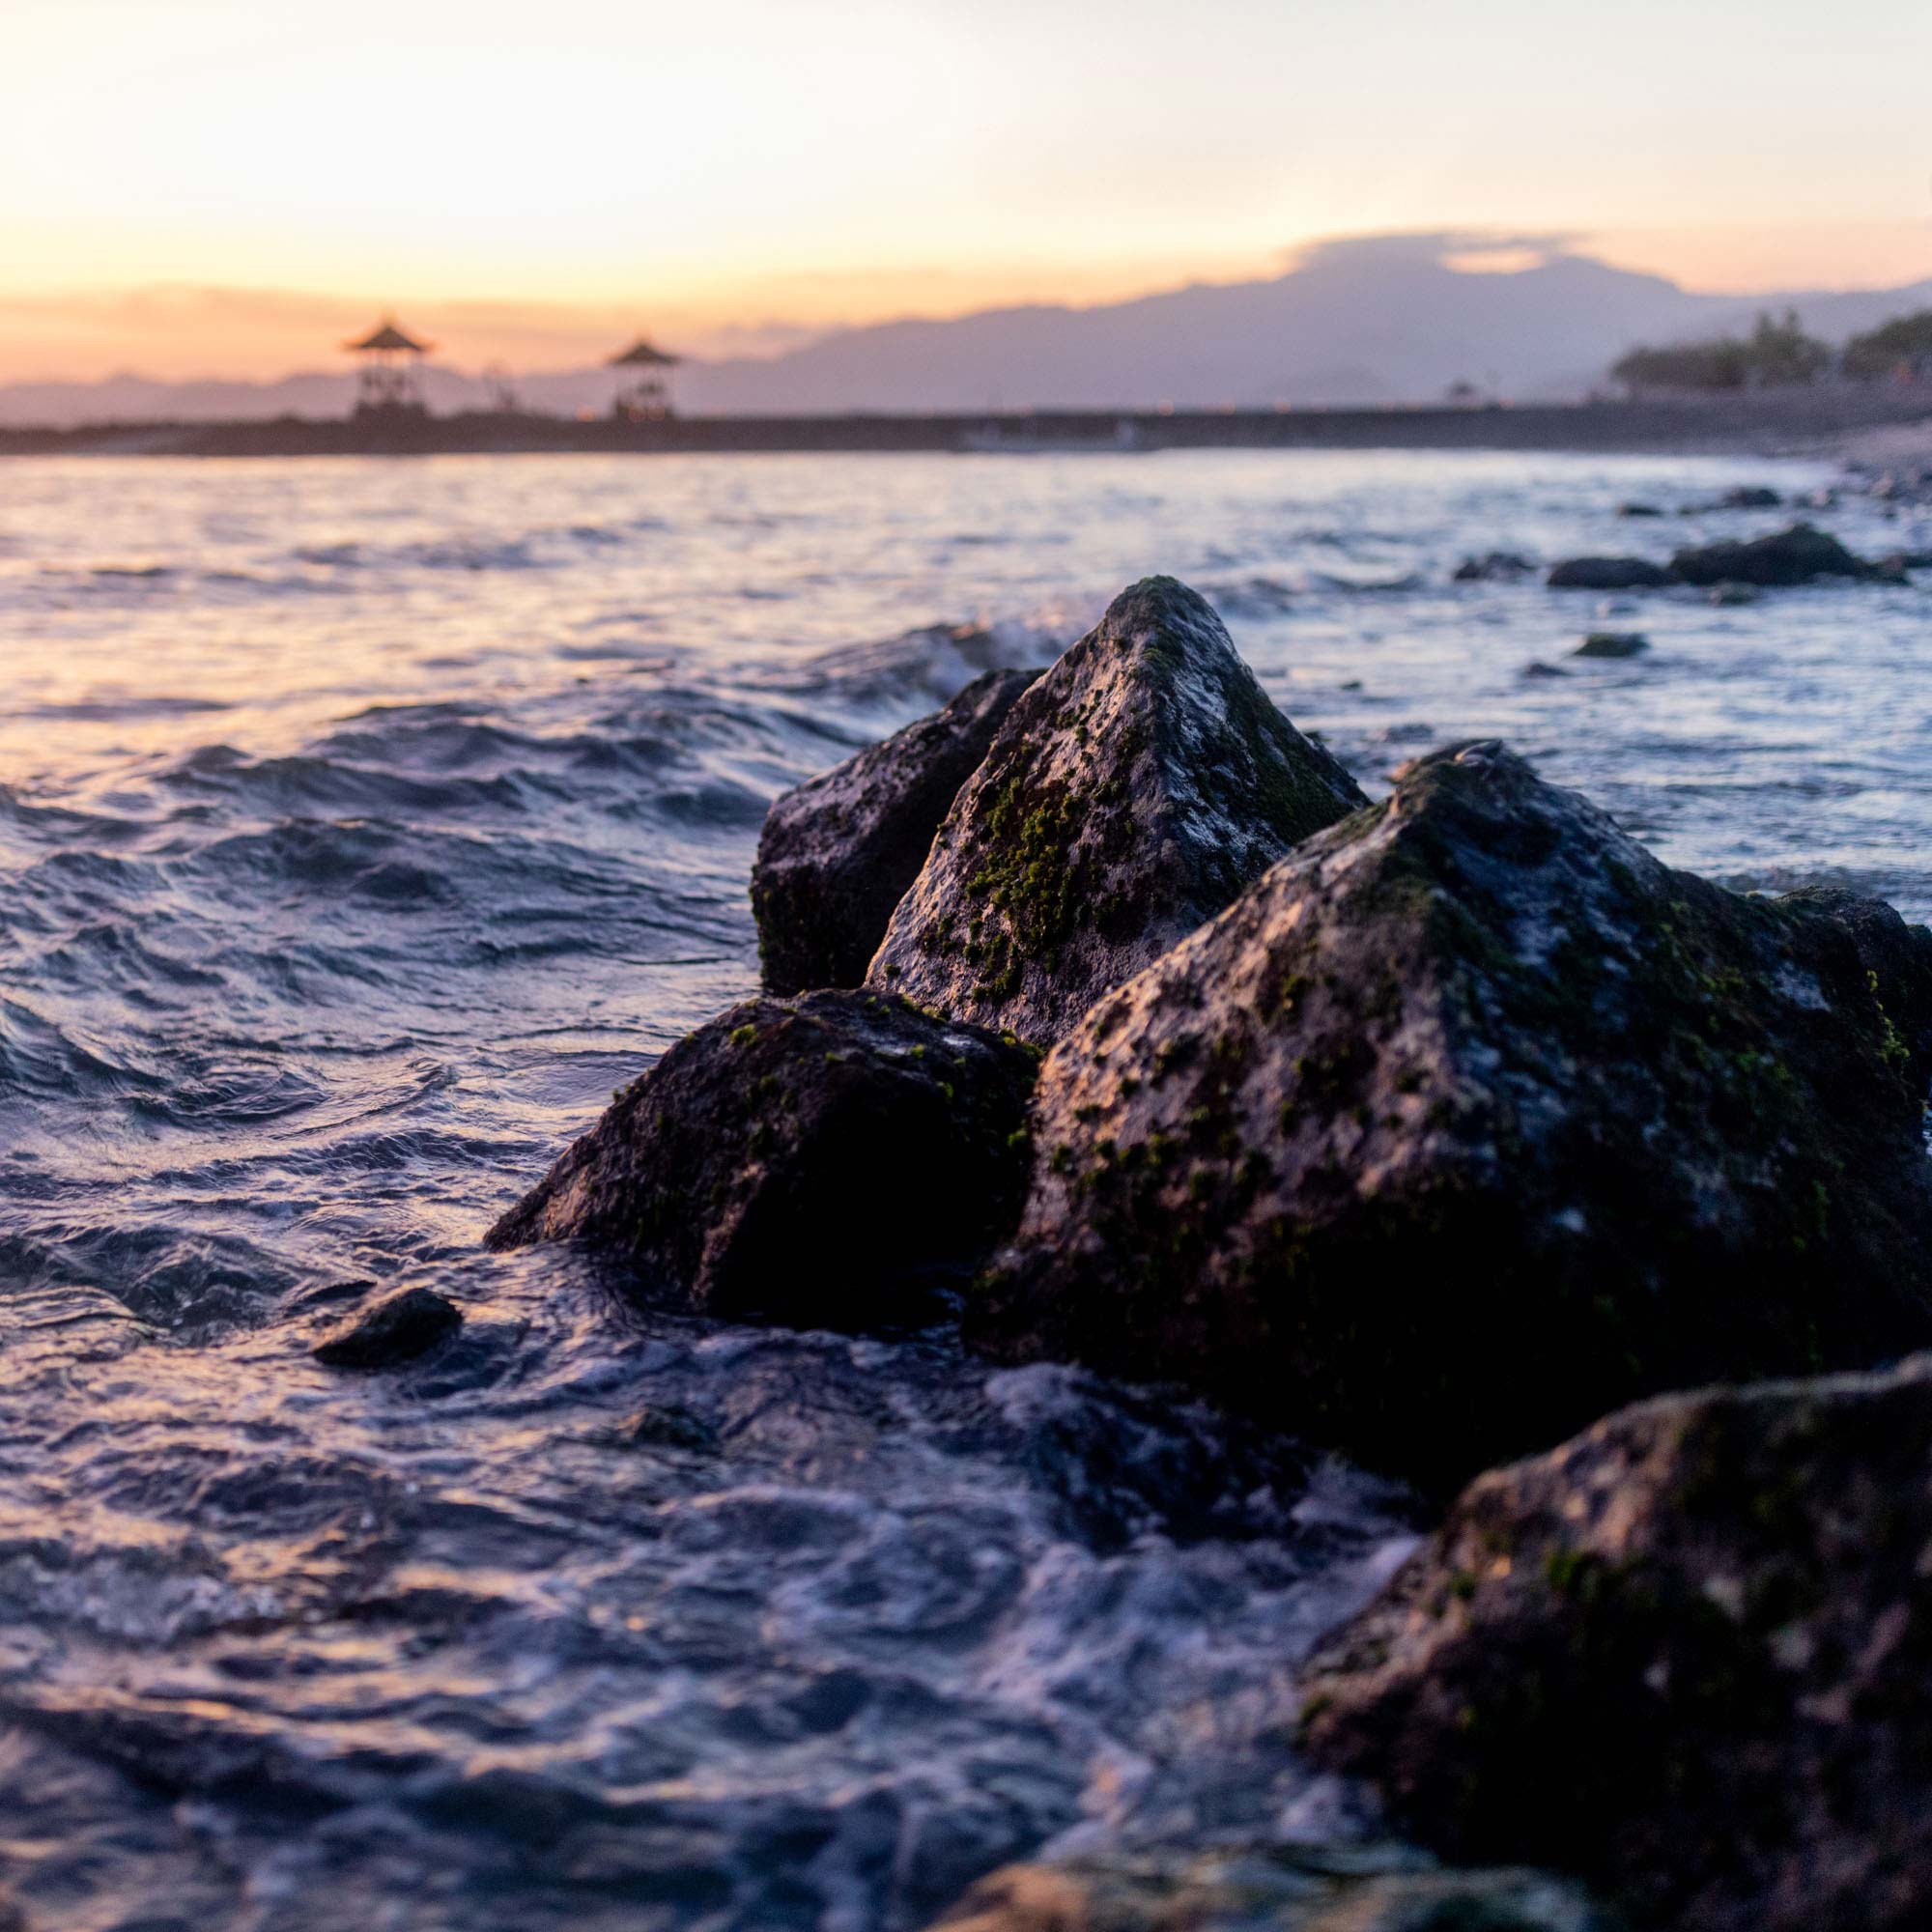 Rocks in water at sunset on beach in Bali, Indonesia | Travel Photography | Nature Photography 